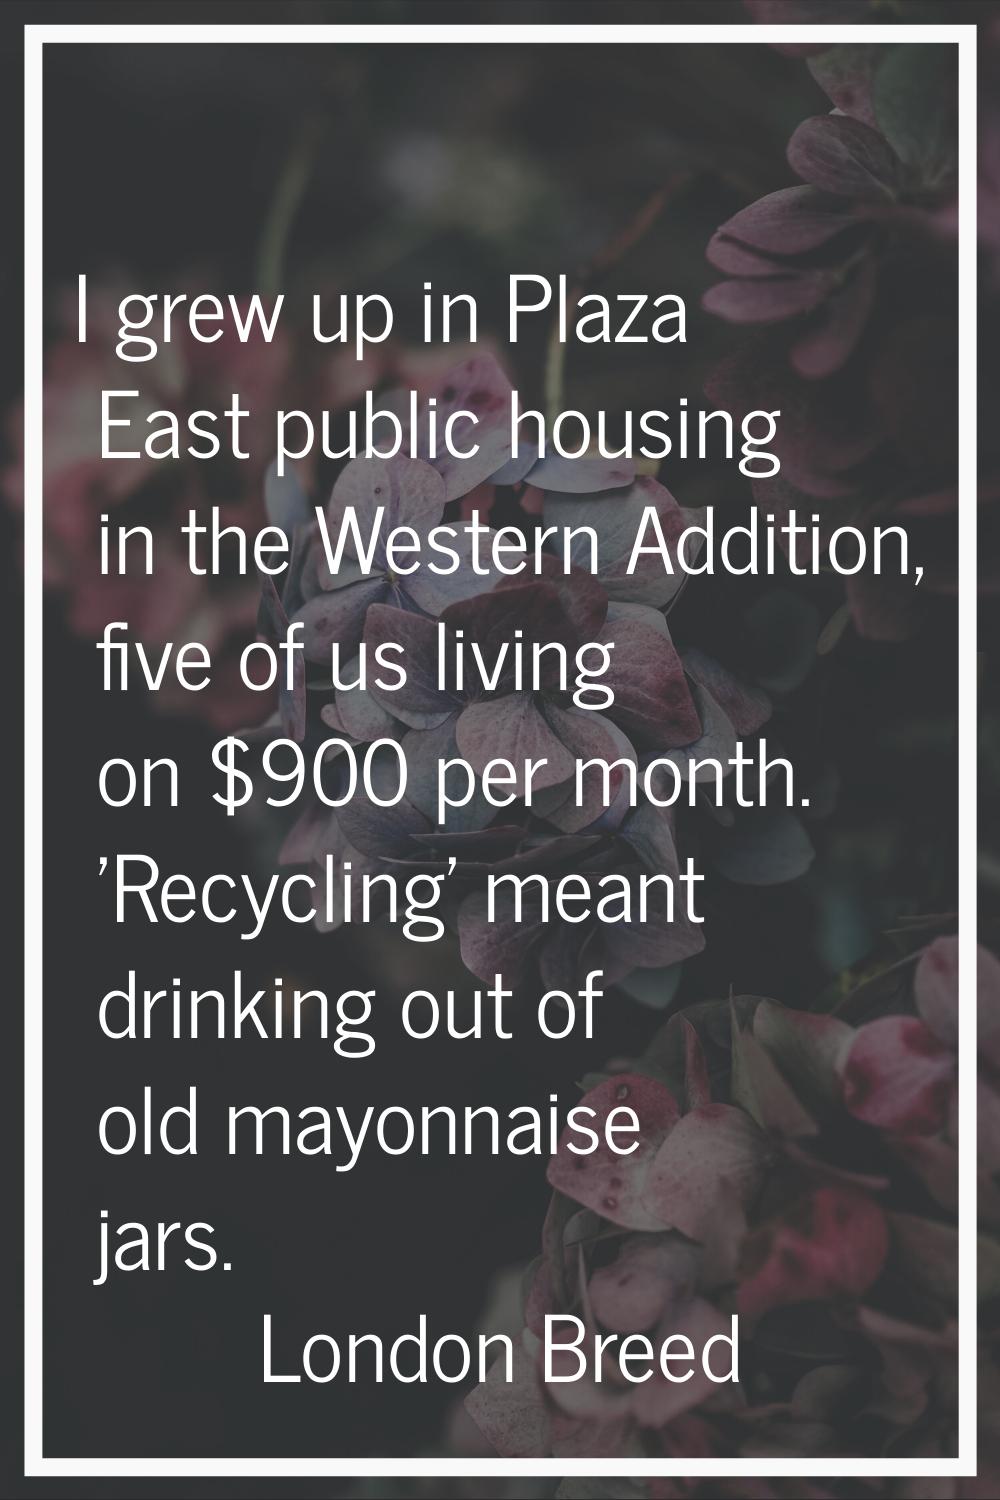 I grew up in Plaza East public housing in the Western Addition, five of us living on $900 per month